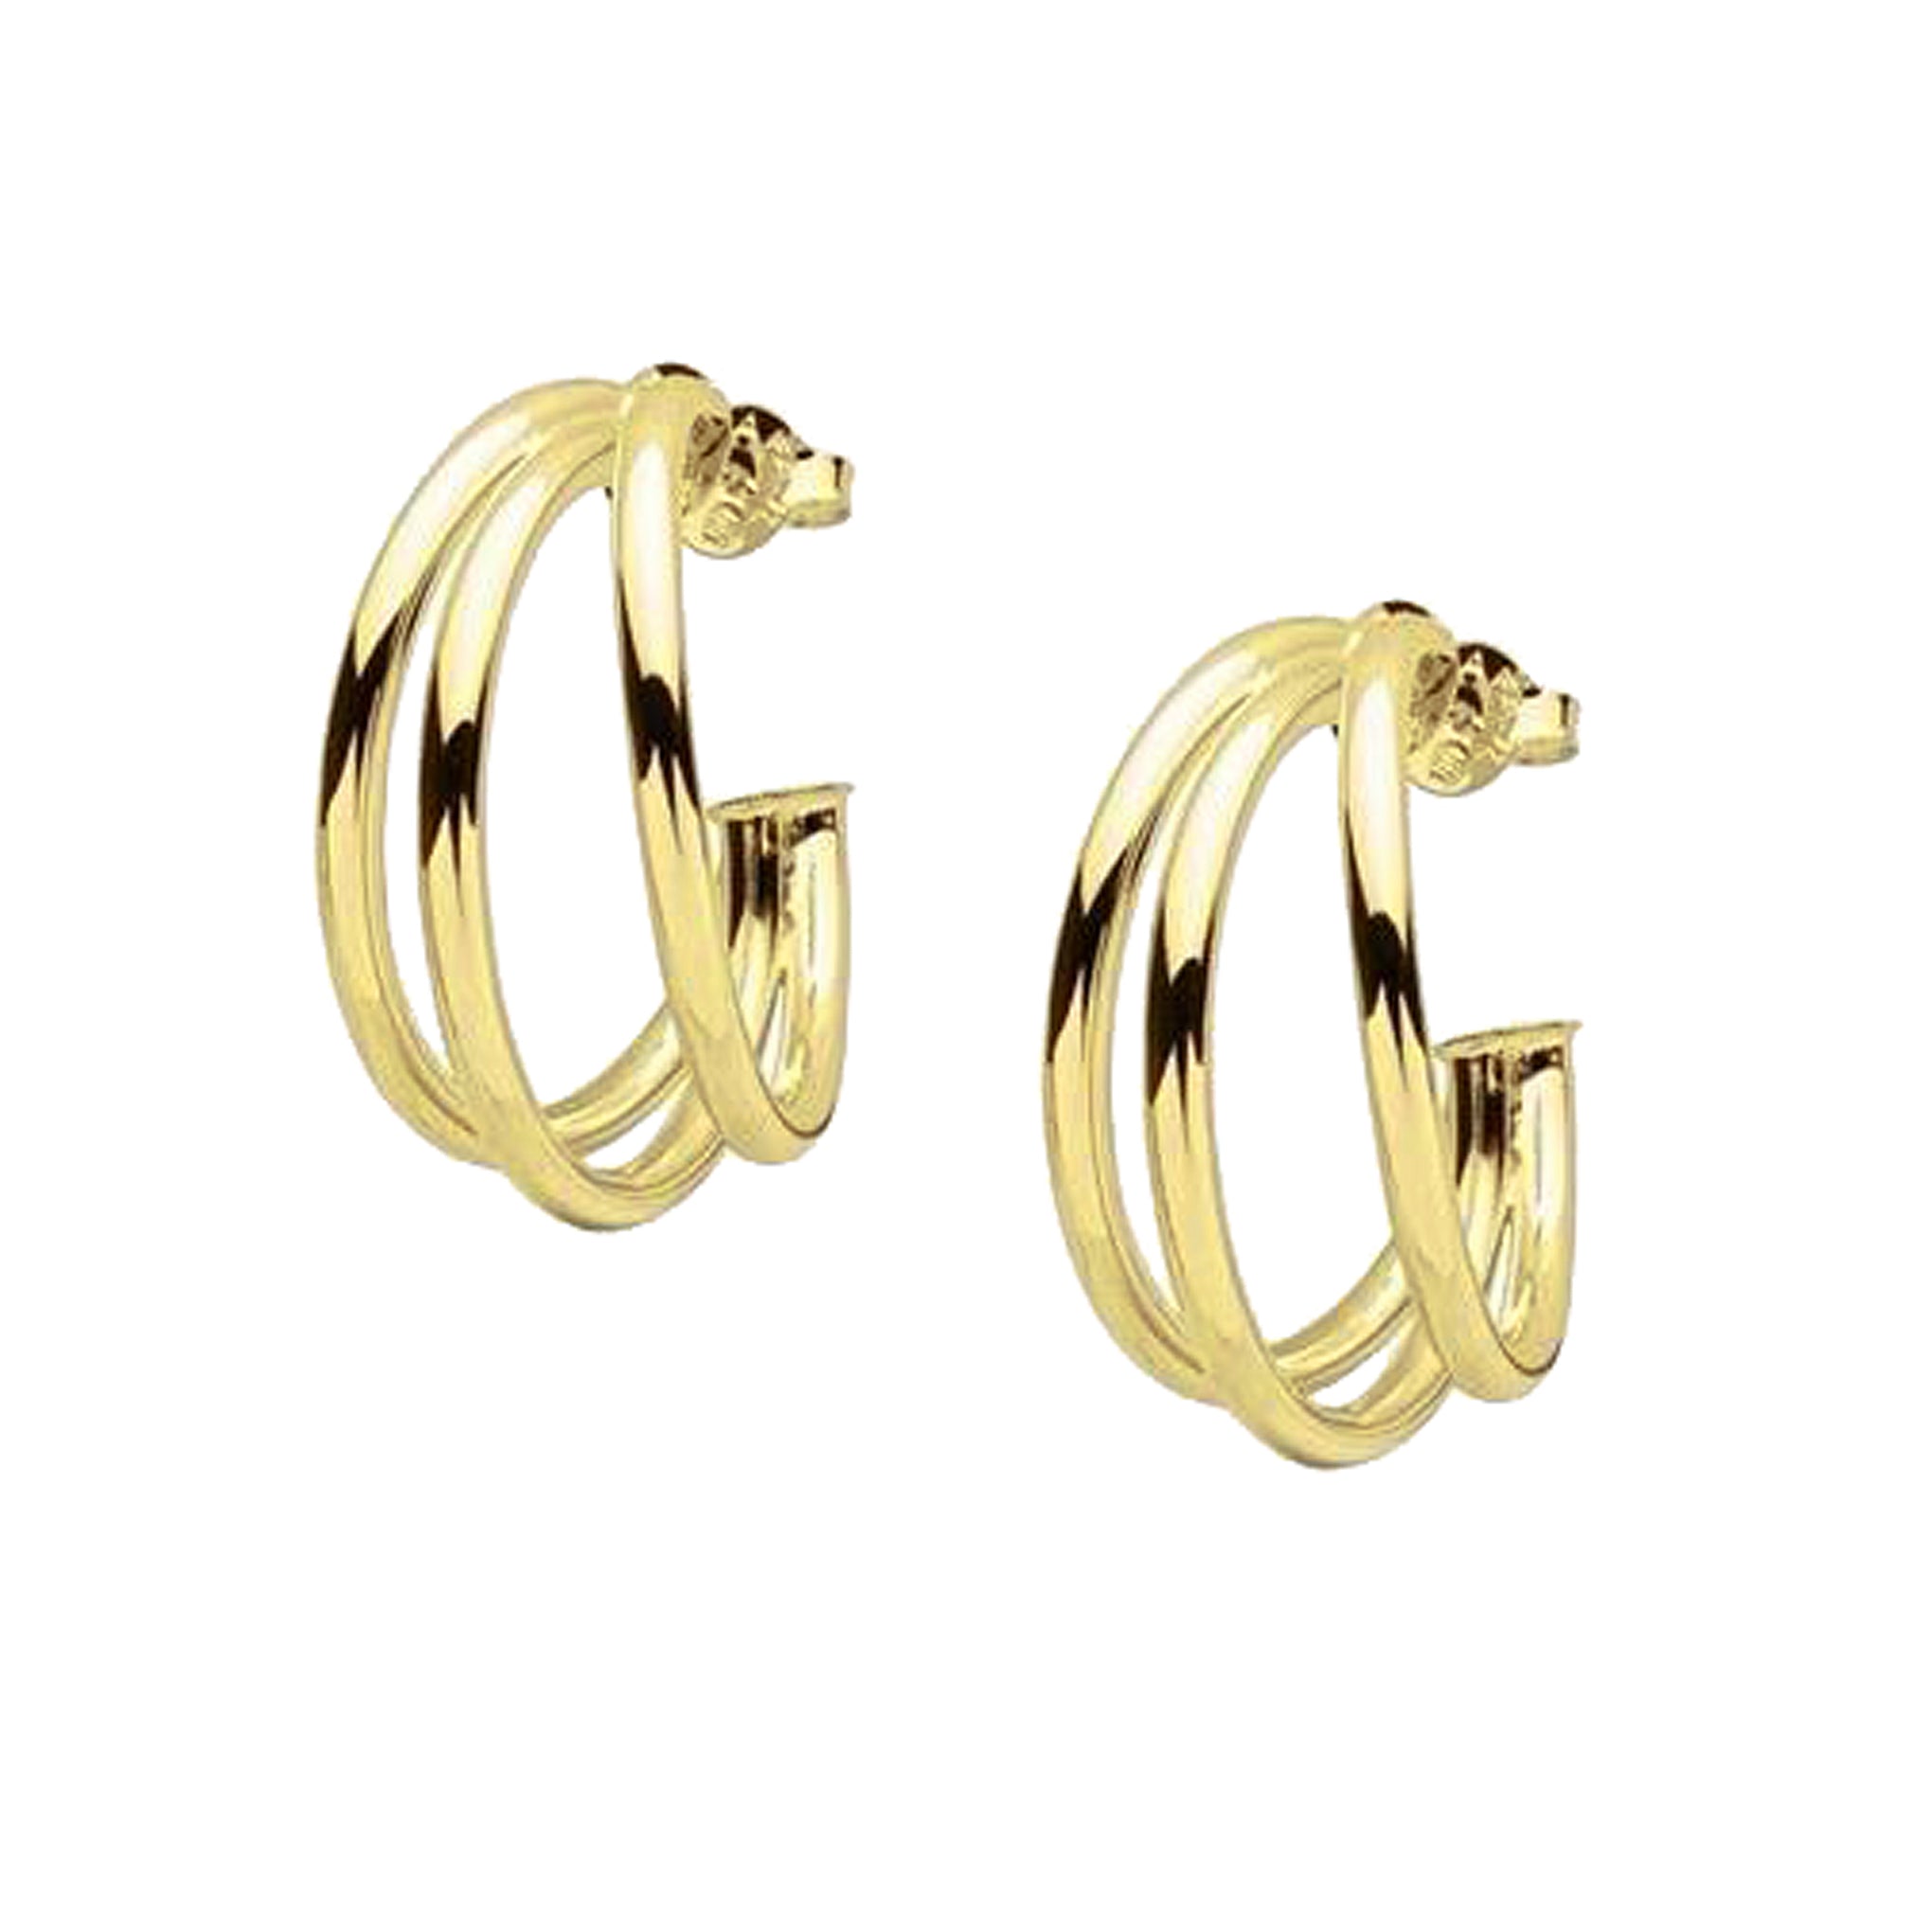 Sheila Fajl Small Claire Triple Hoop Earrings in Polished Gold Plated